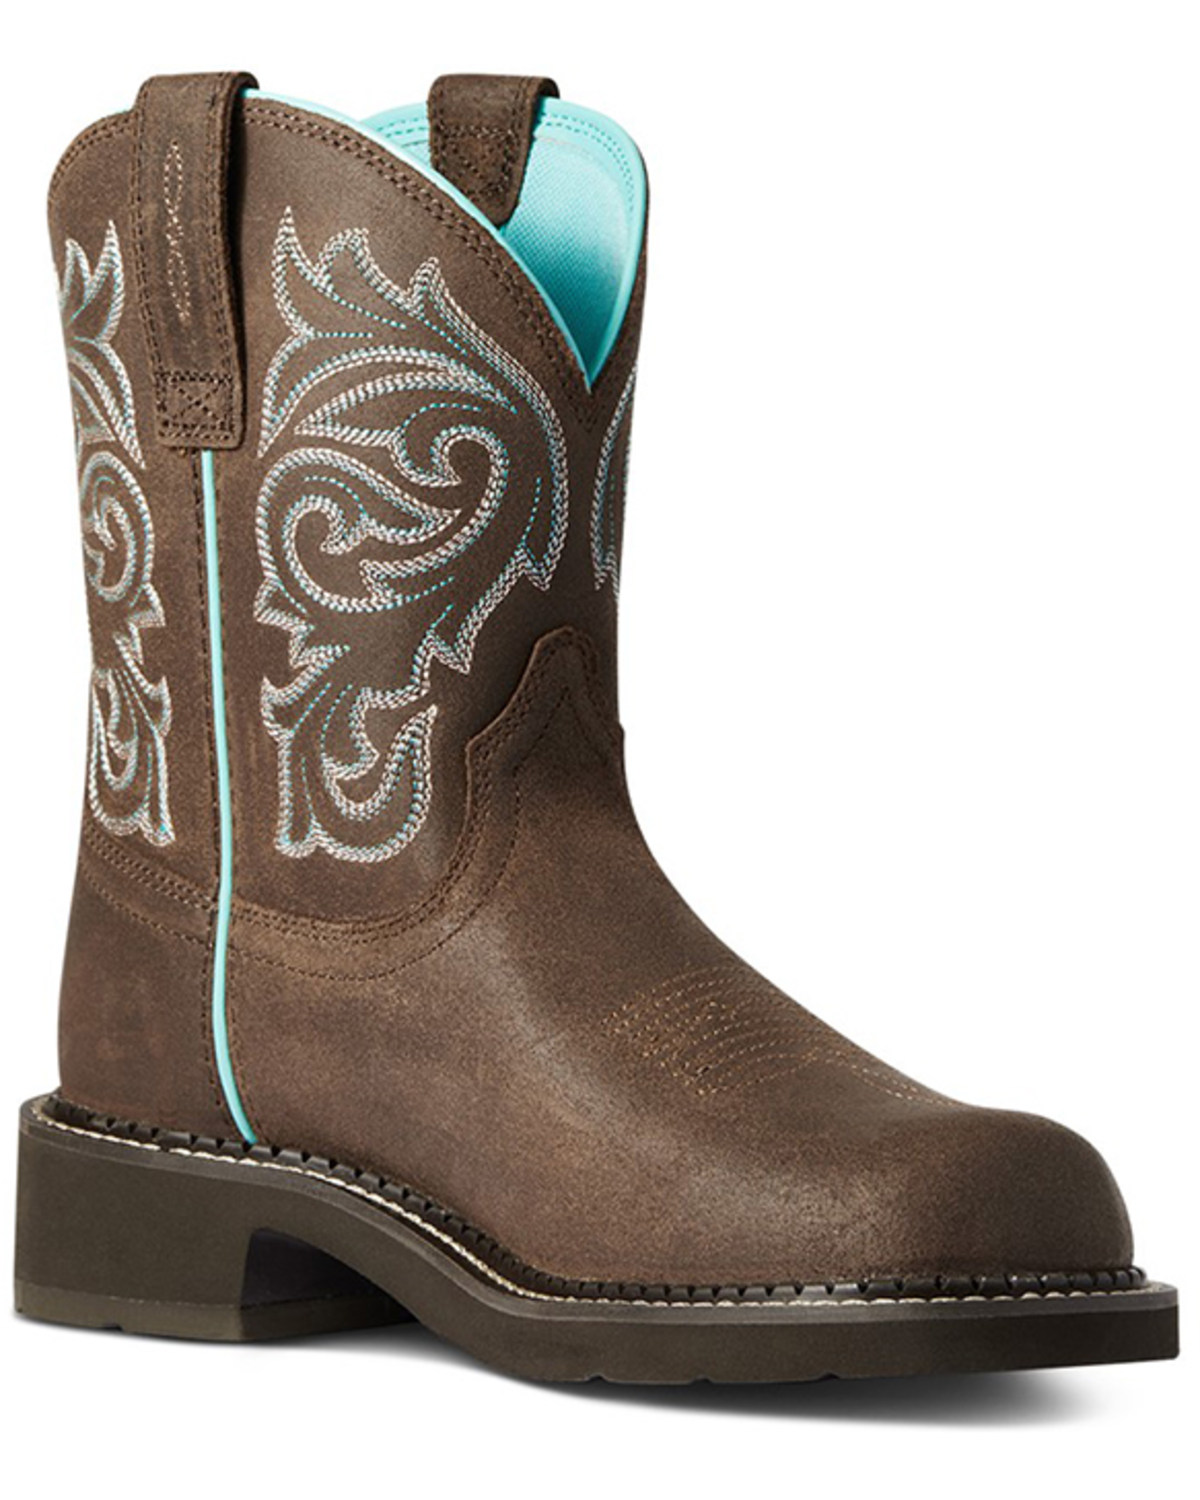 Ariat Women's Heritage Mazy Western Performance Boots - Round Toe